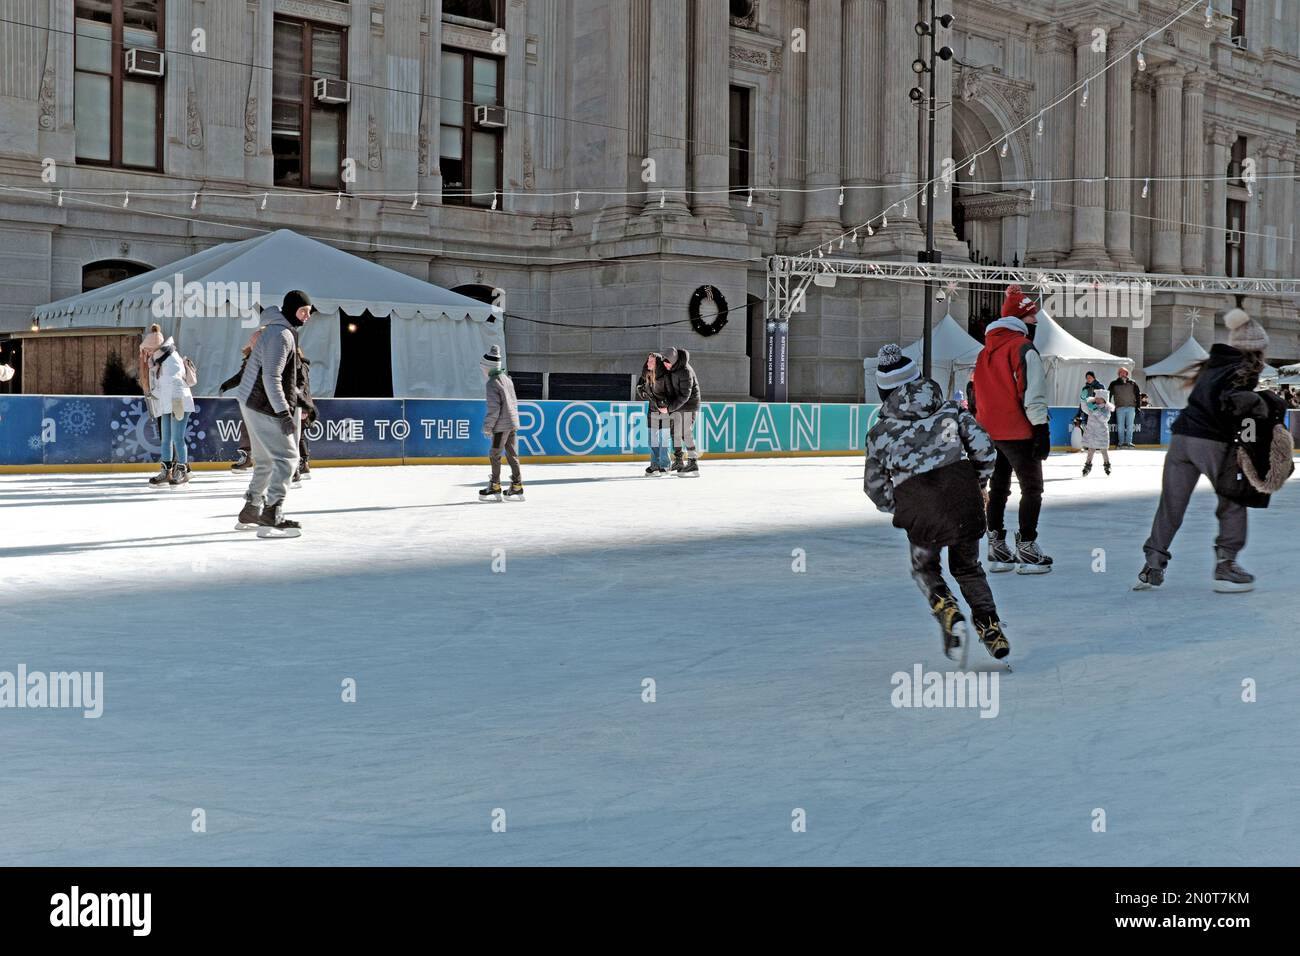 The summer fountains of Dilworth Park in downtown Philadelphia are transformed into the Rothman Orthopaedics ice rink during winter. Stock Photo